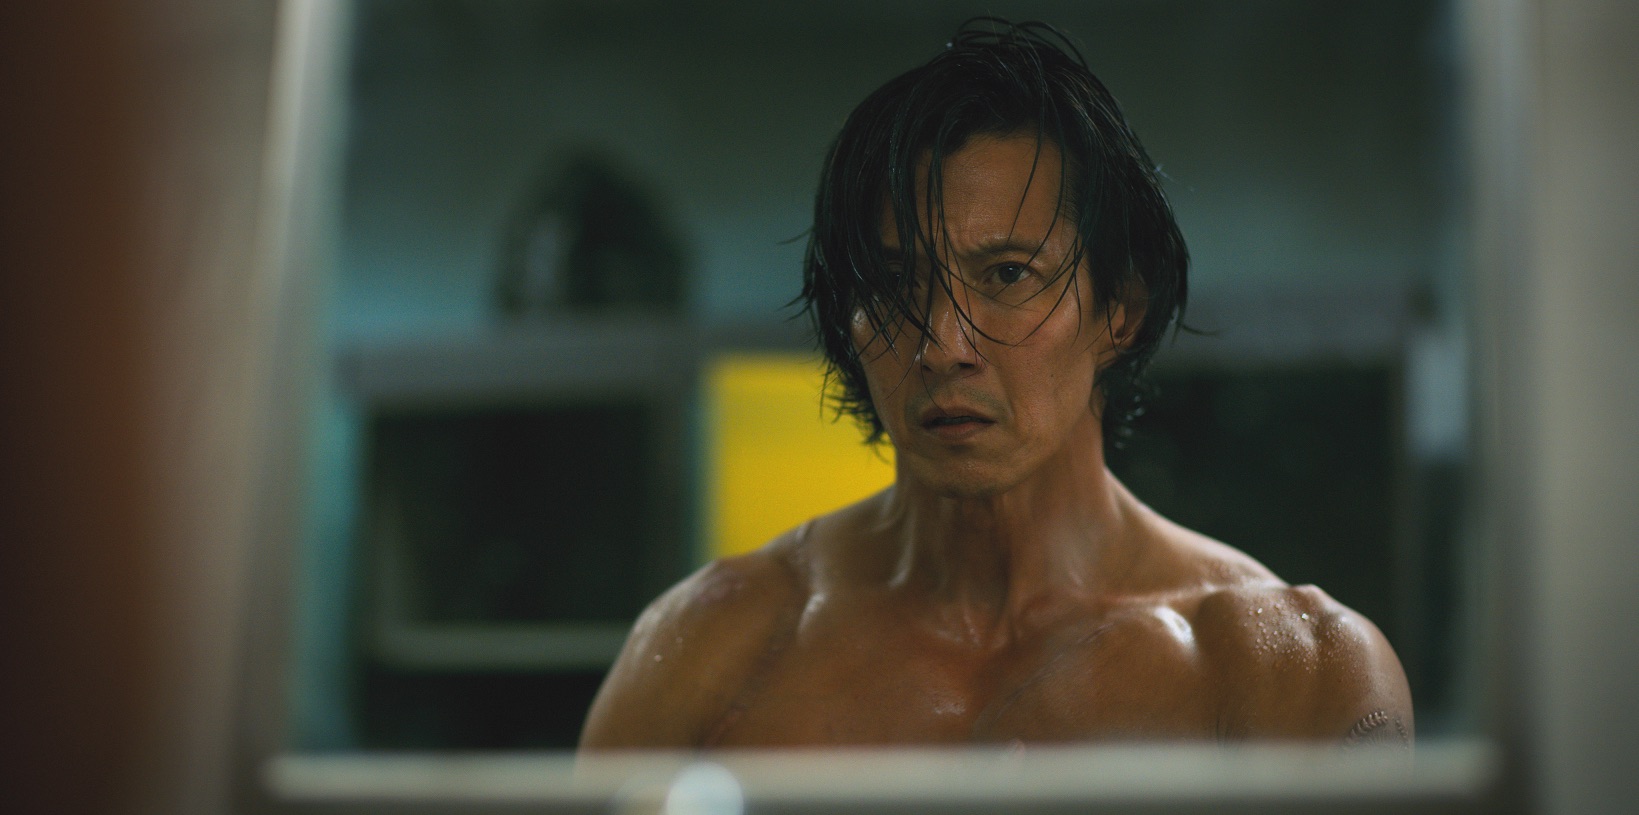 Will Yun Lee as Takeshi Kovacs on "Altered Carbon"